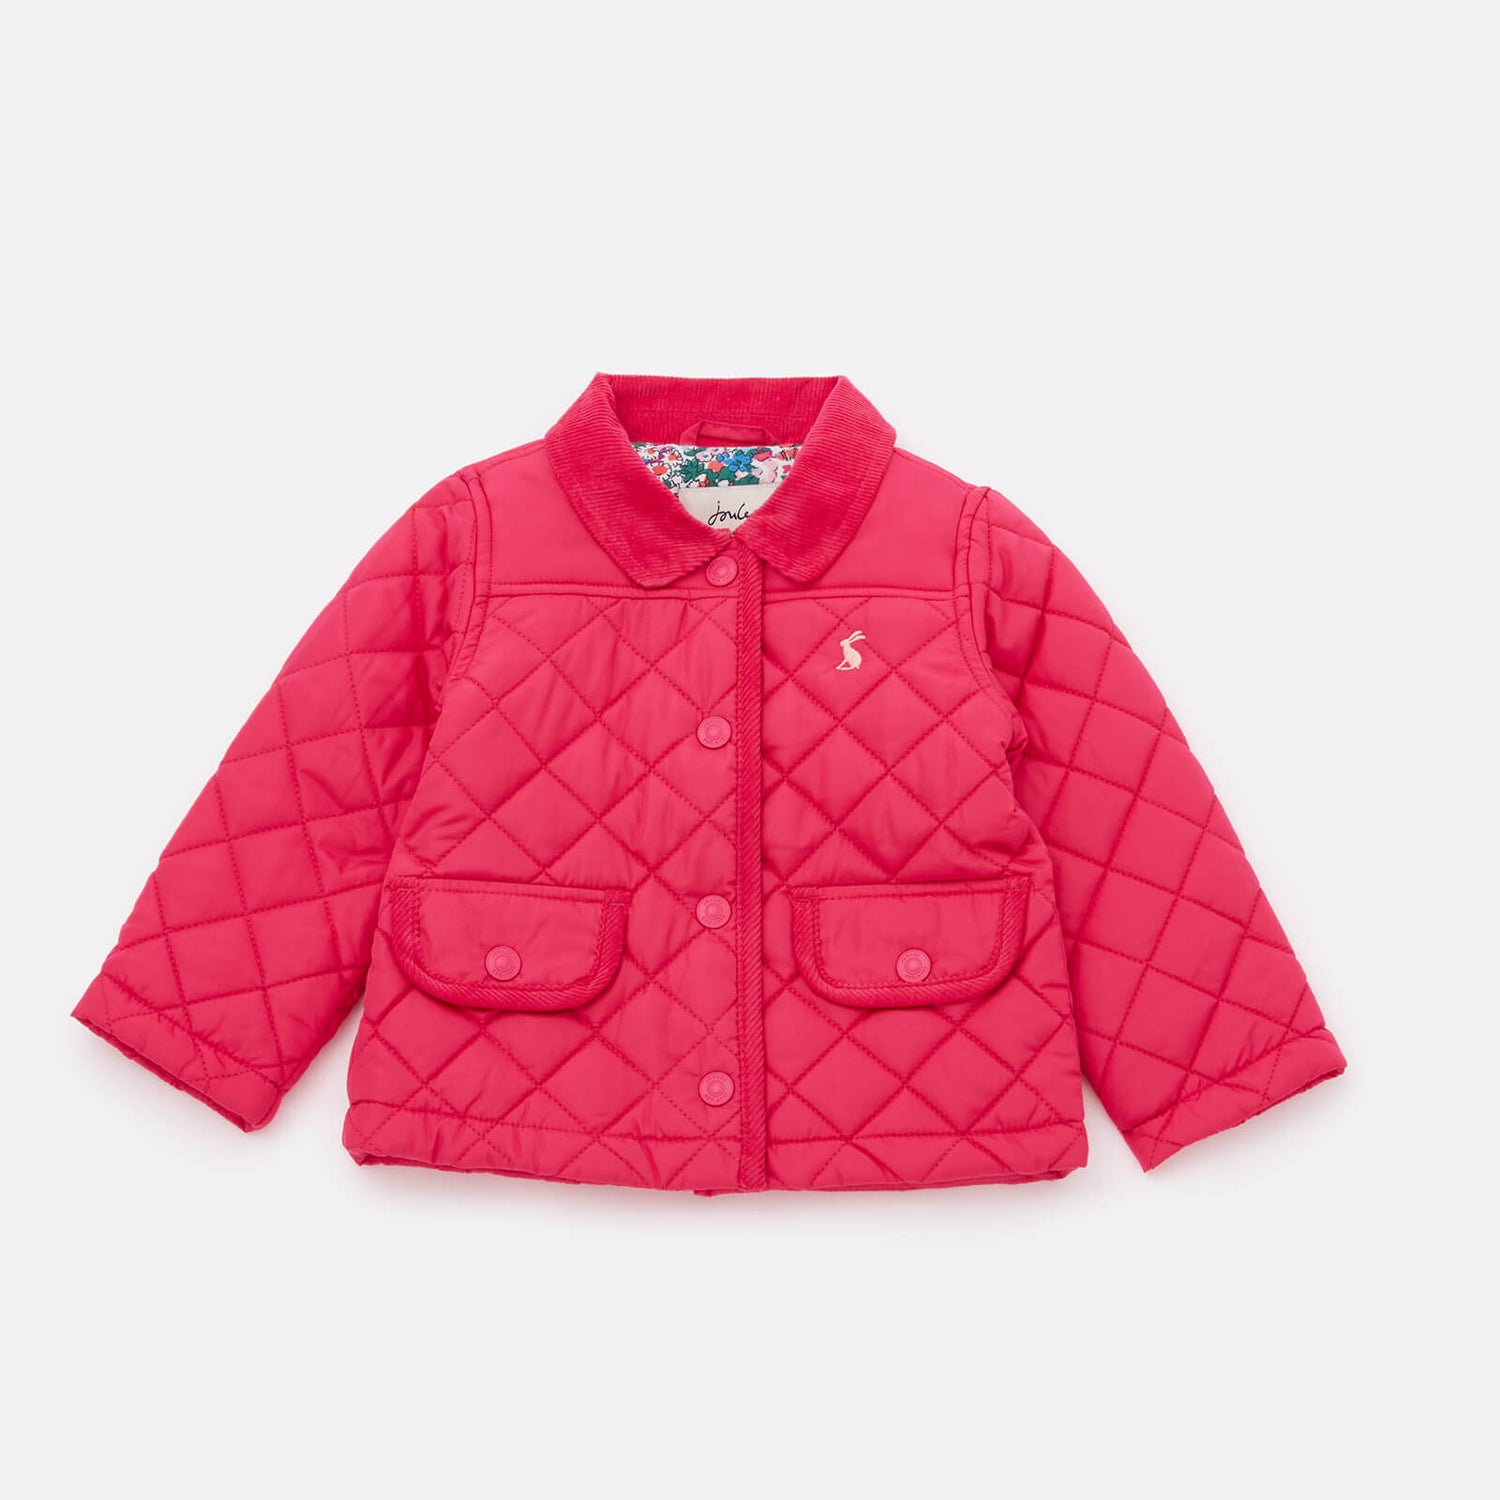 Joules Babies Mabel Quilted Jacket - 3-6 months